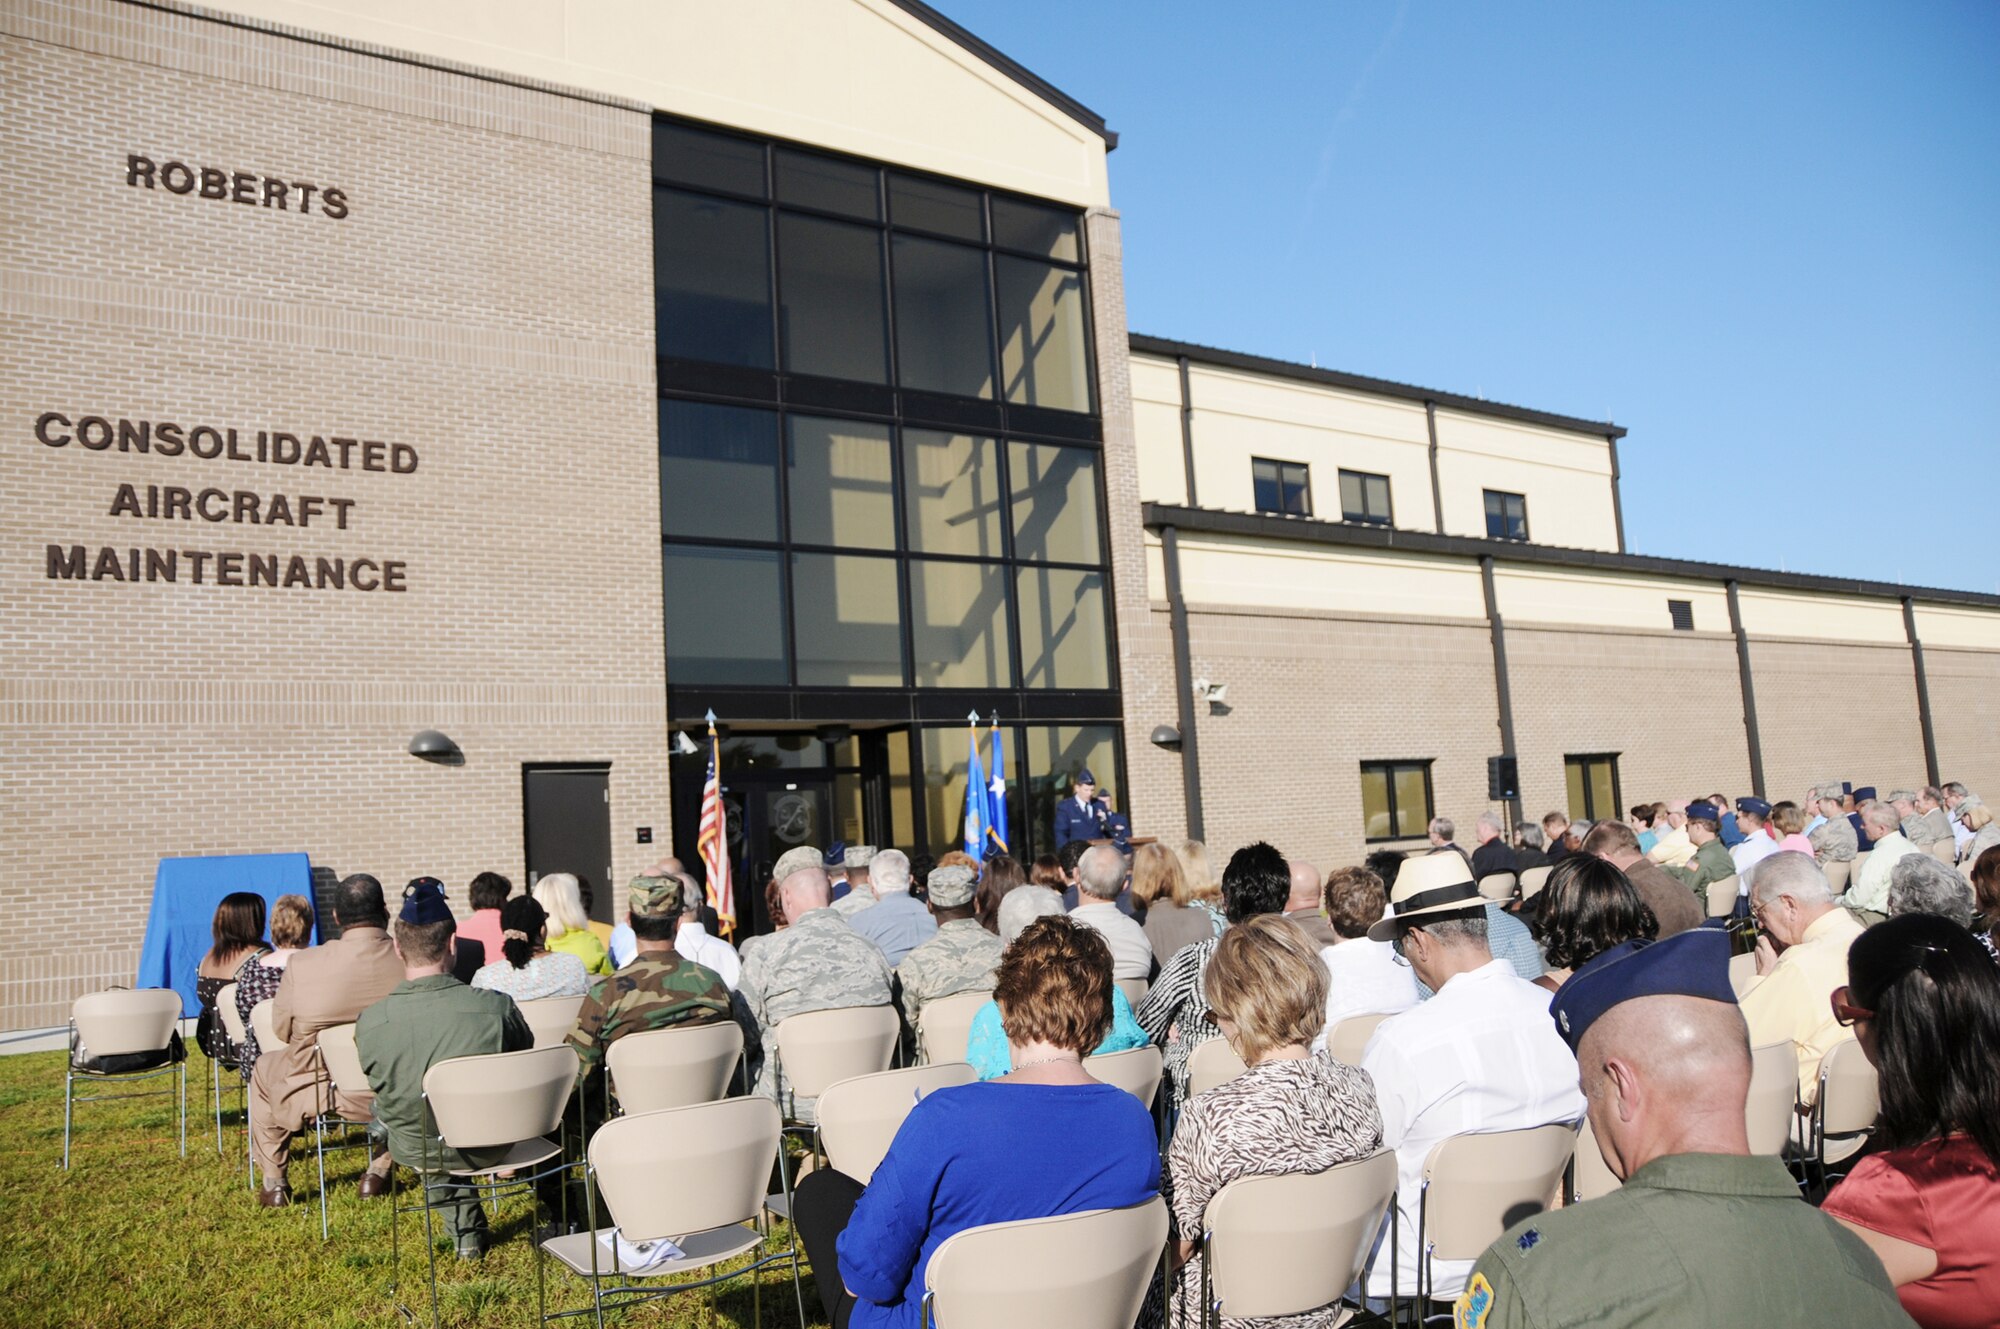 Airmen from Keesler Air Force Base, Miss., performed a dedication ceremony of the Consolidated Aircraft Maintenance Facility named after Col. (Ret.) Lawrence Roberts who served as a Tuskegee Airman and adopted Biloxi, Miss., as his home. The $22.6 million facility will be used to maintain the C-130J six-bladed composite propeller, and many other significant maintenance capabilities. The Roberts' family, along with more than 250 community and civic leaders, attended the ceremony. (U.S. Air Force photo/Kemberly Groue)